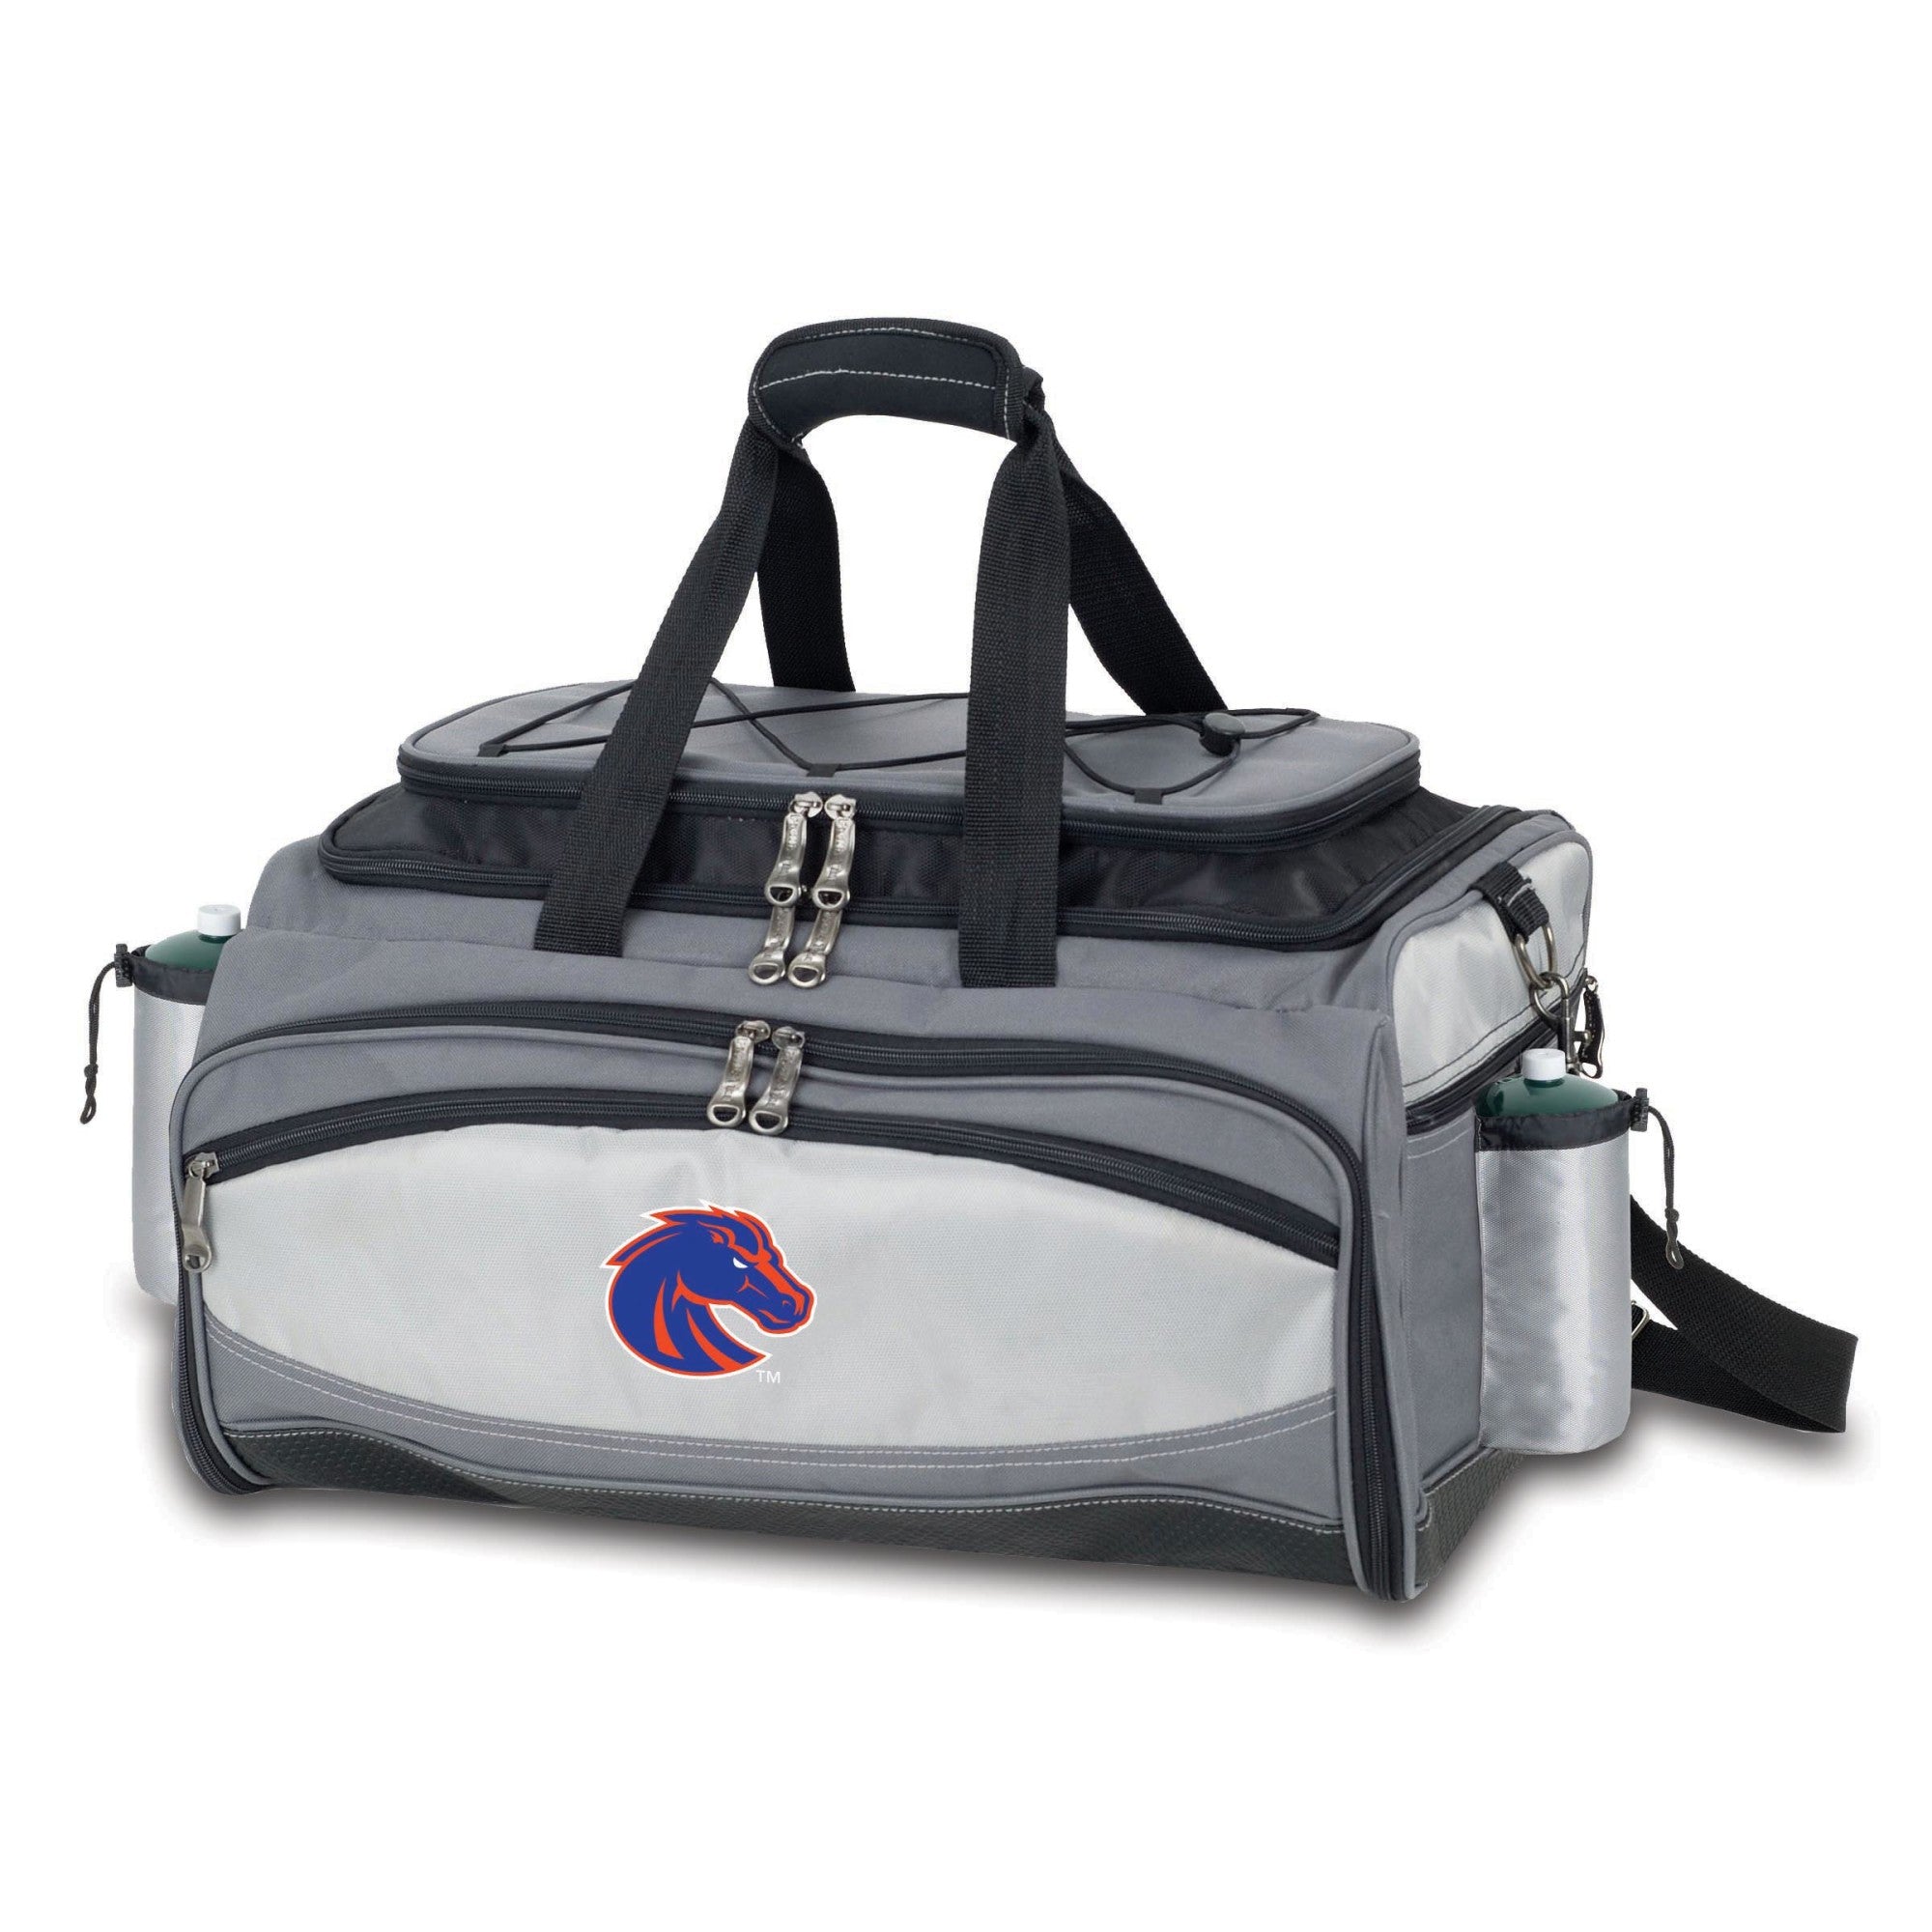 Boise State Broncos - Vulcan Portable Propane Grill & Cooler Tote